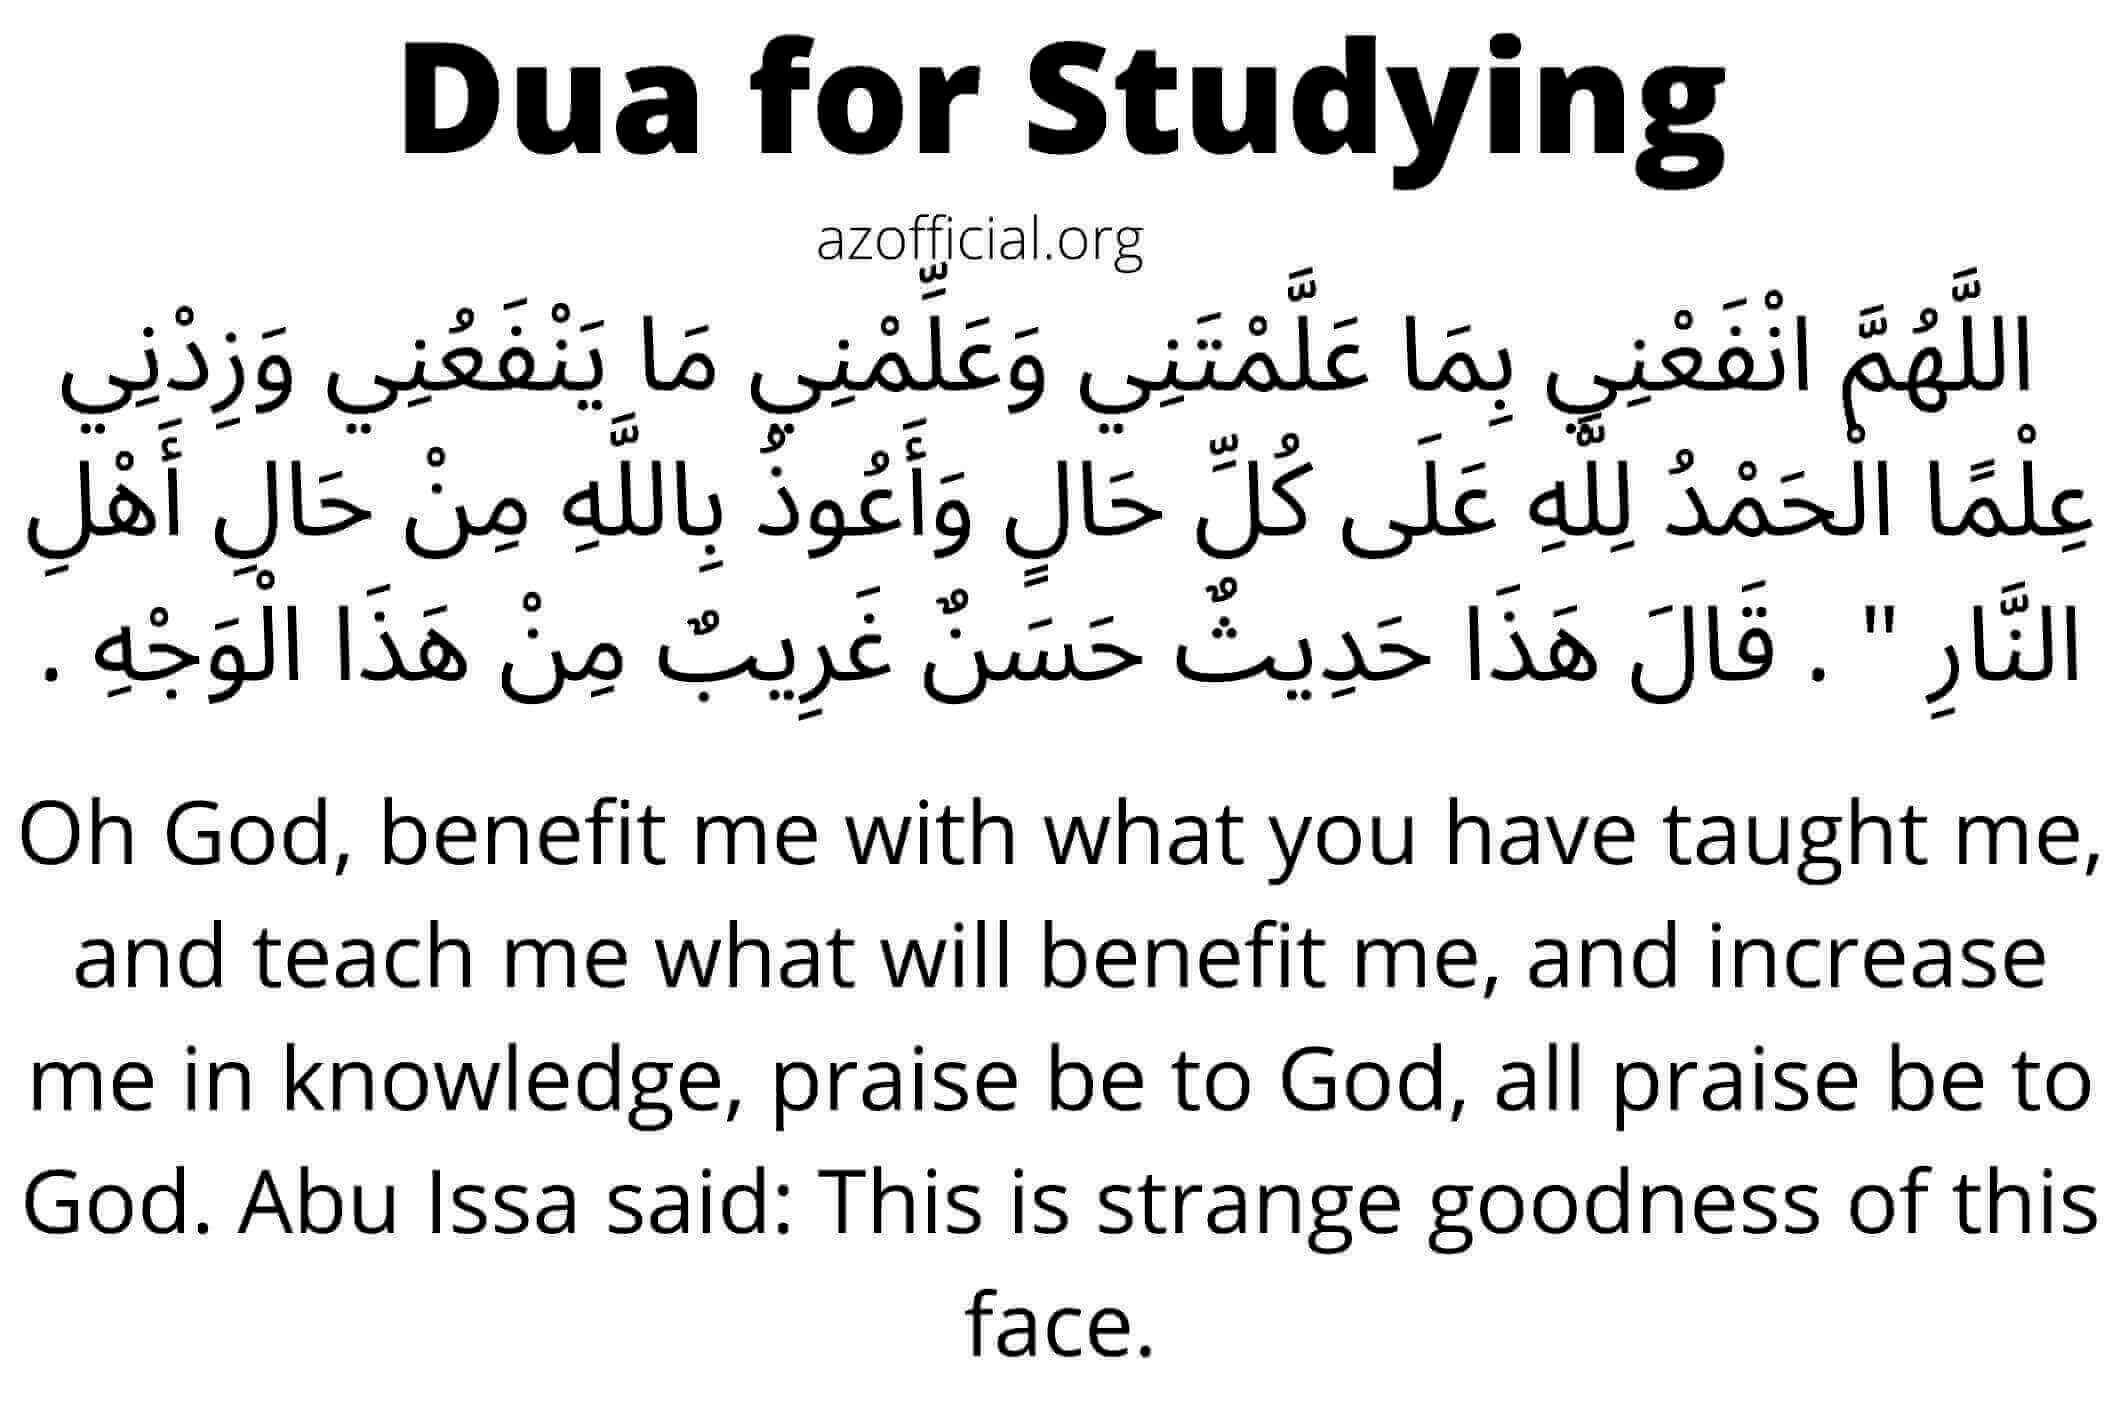 Dua for Studying,